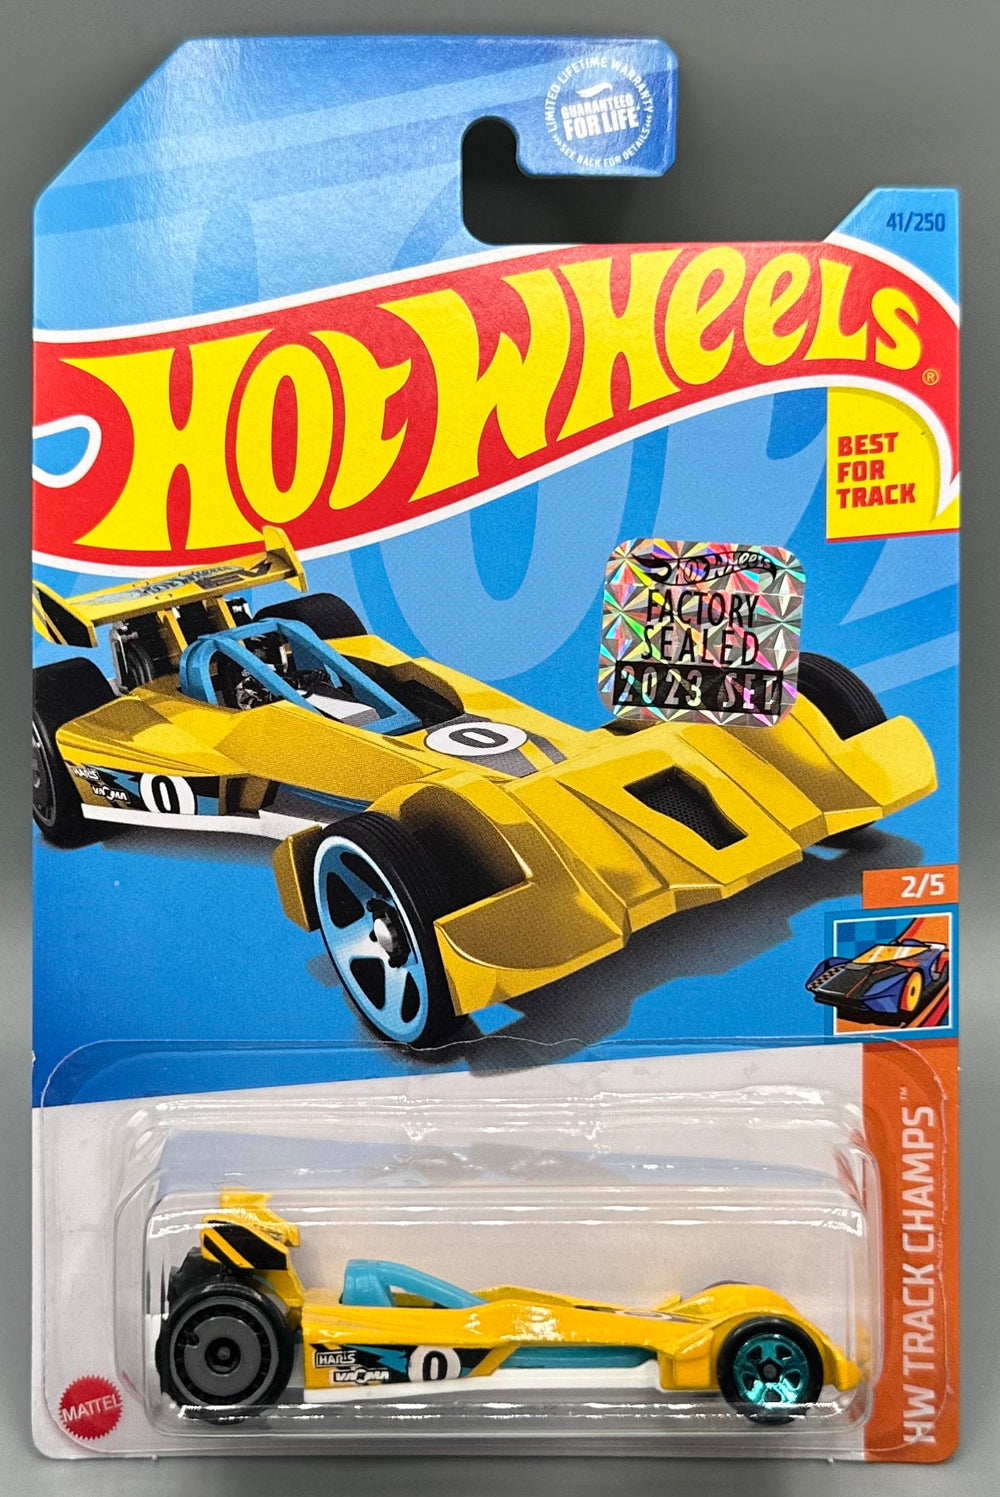 Hot Wheels Hot Wired